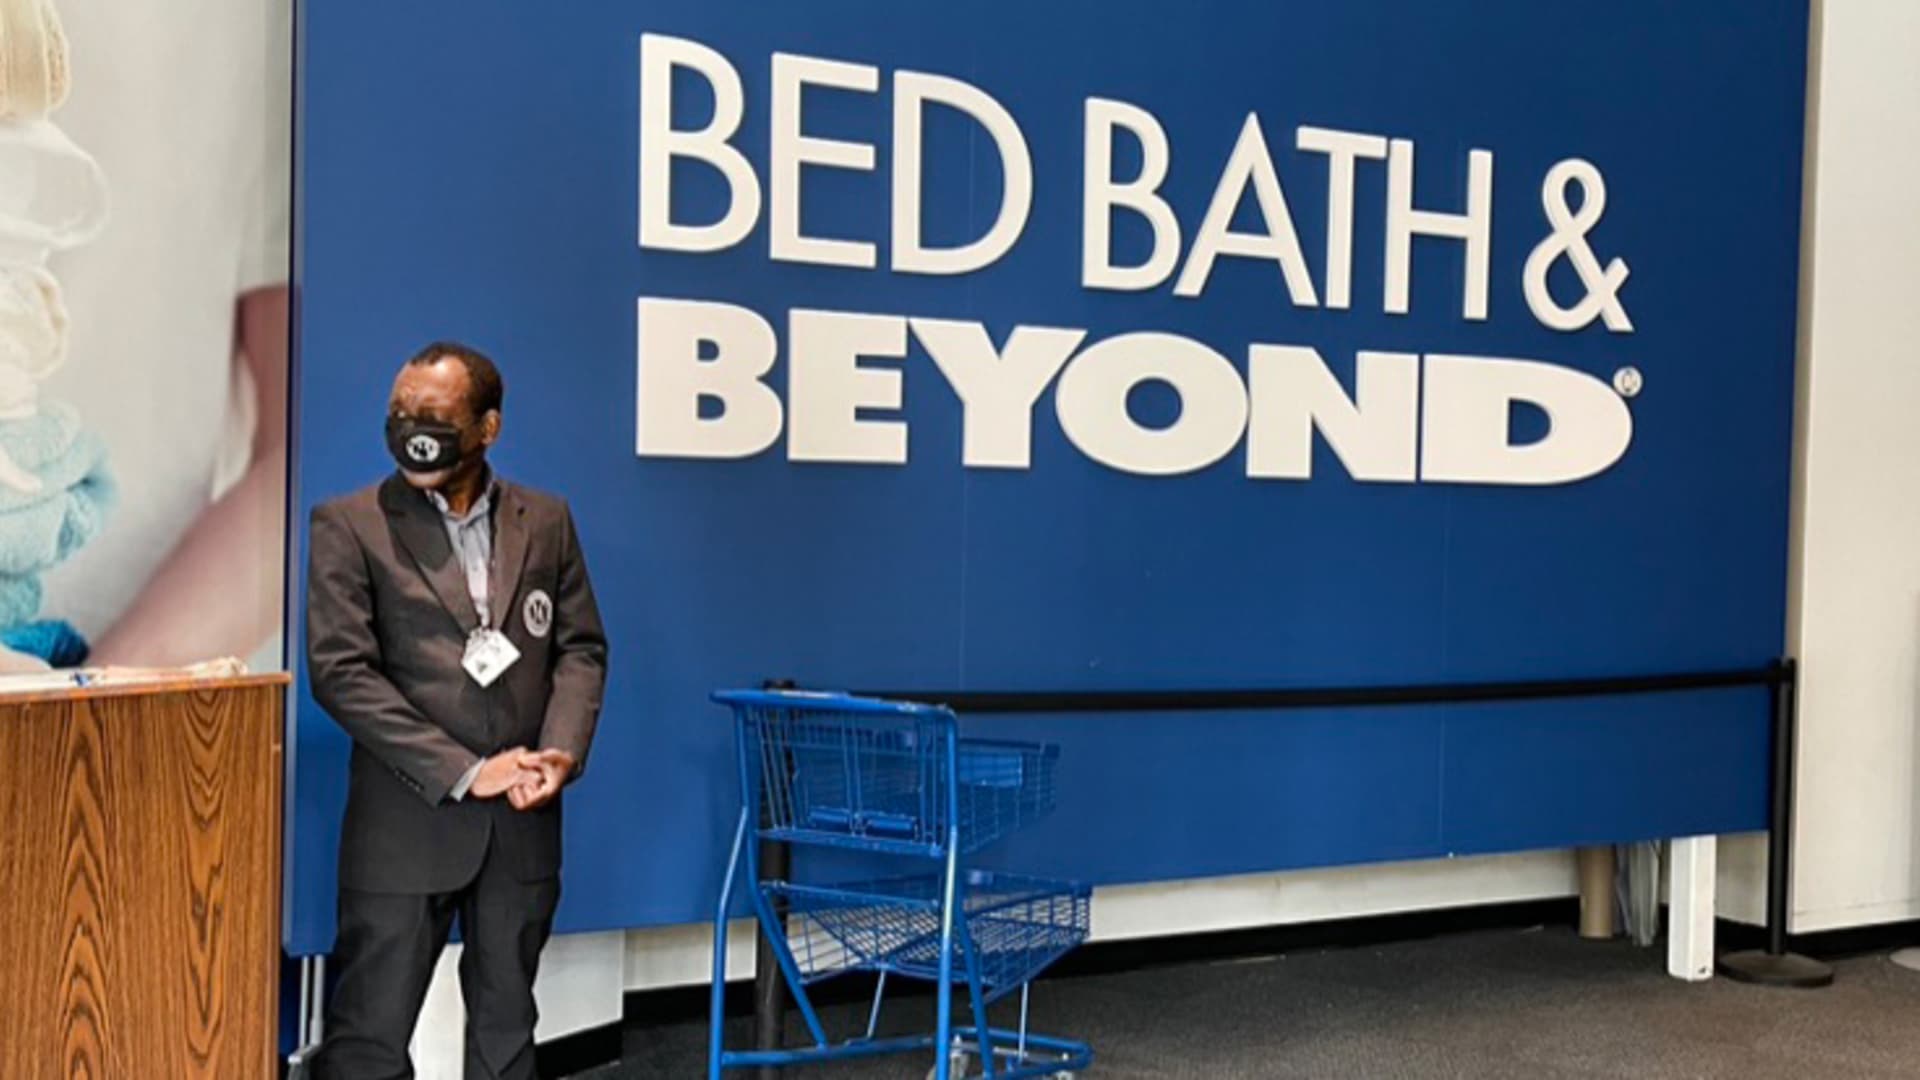 Surging Bed Bath & Beyond shares downgraded by Baird on ‘latest meme stock frenzy’